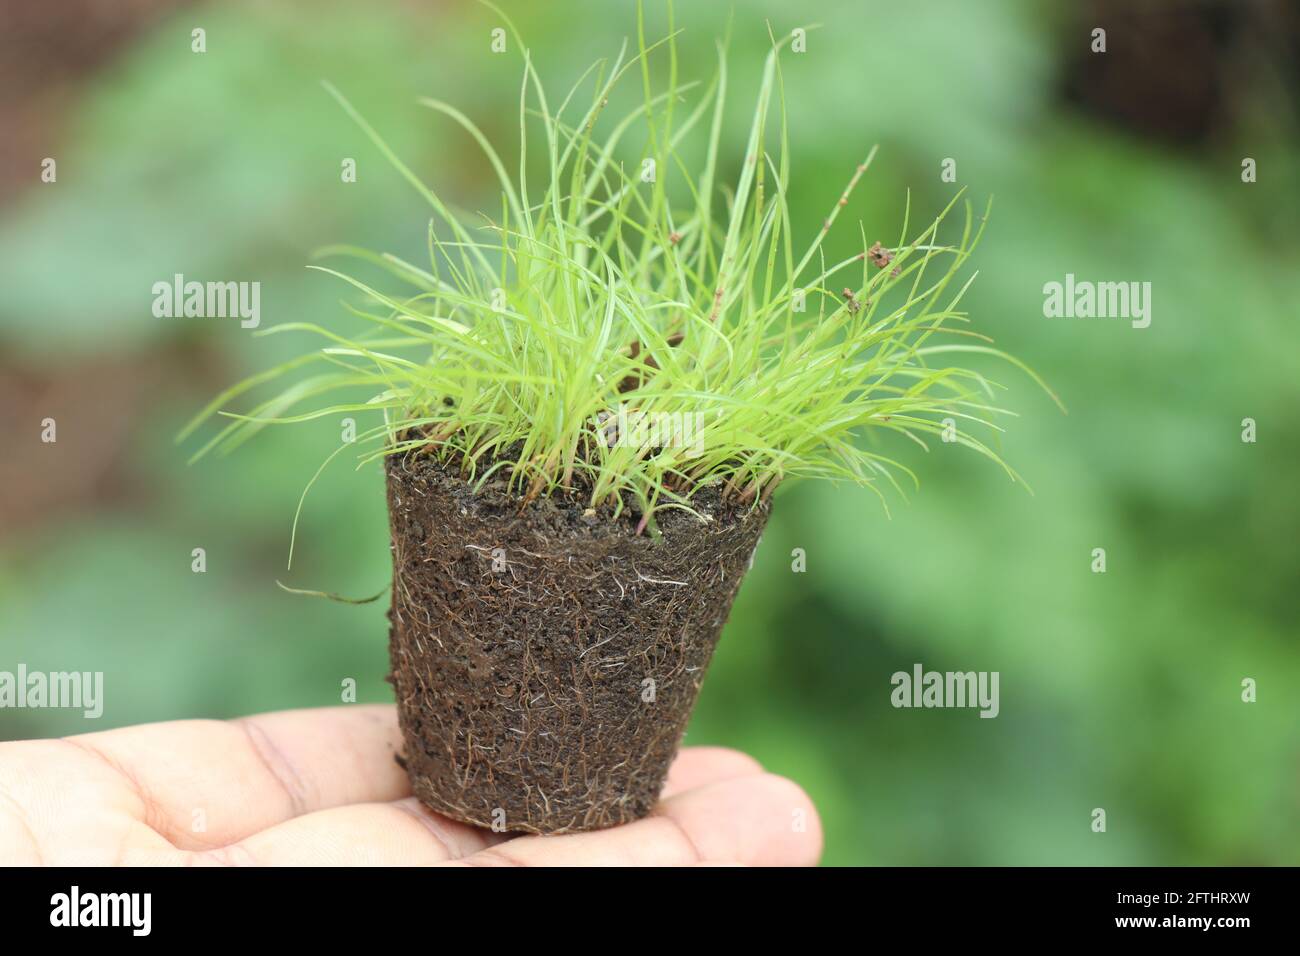 Small pot shaped soil with group of fresh green grass plant taken out from germination tray held in hand Stock Photo